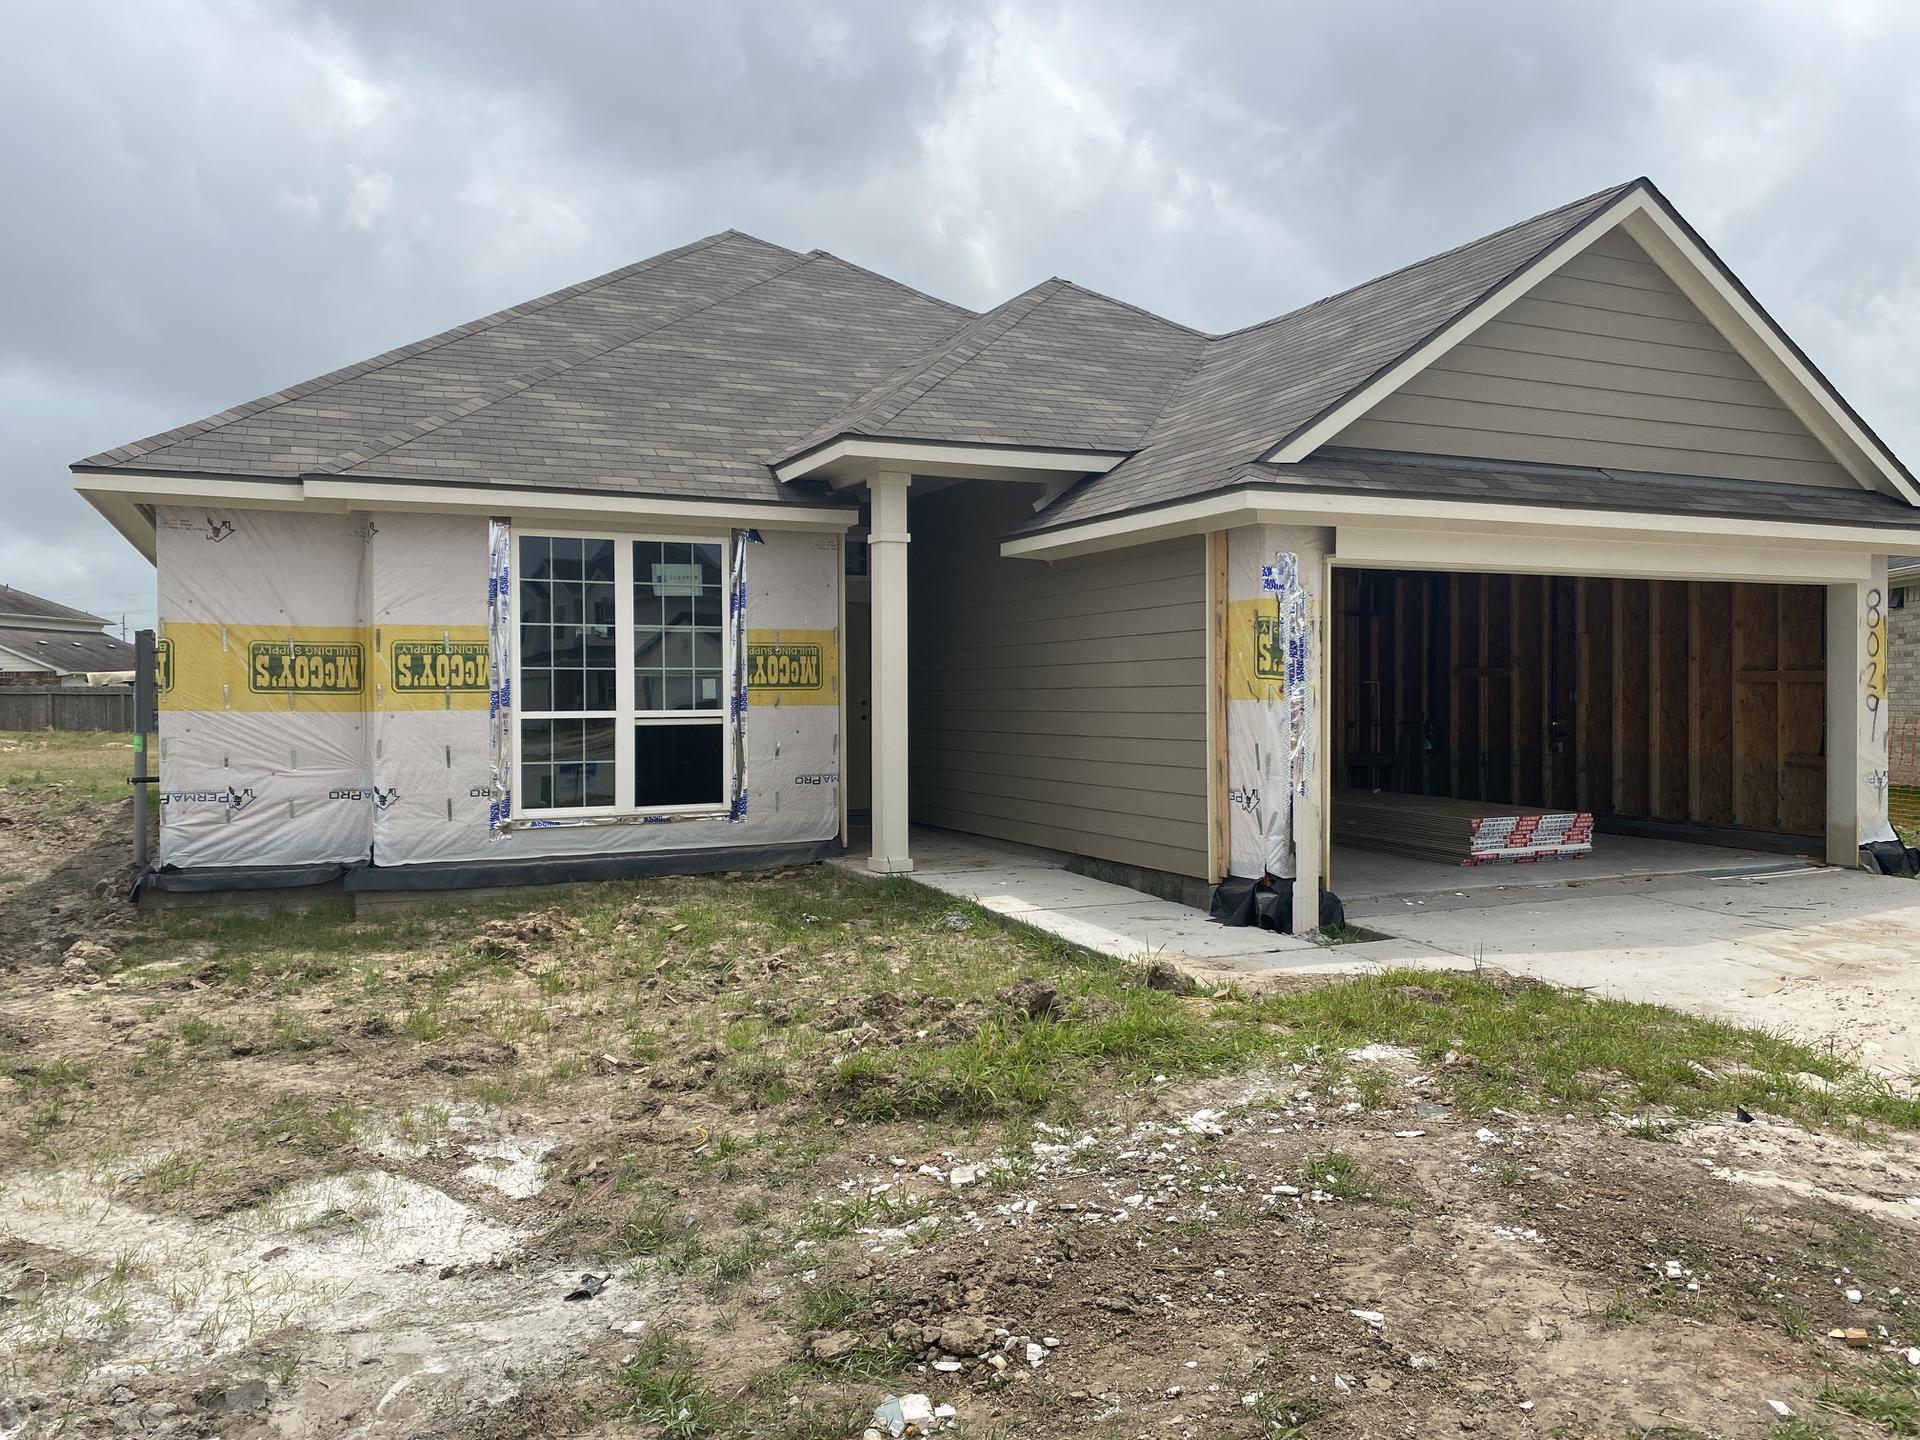 4br New Home in Texas City, TX